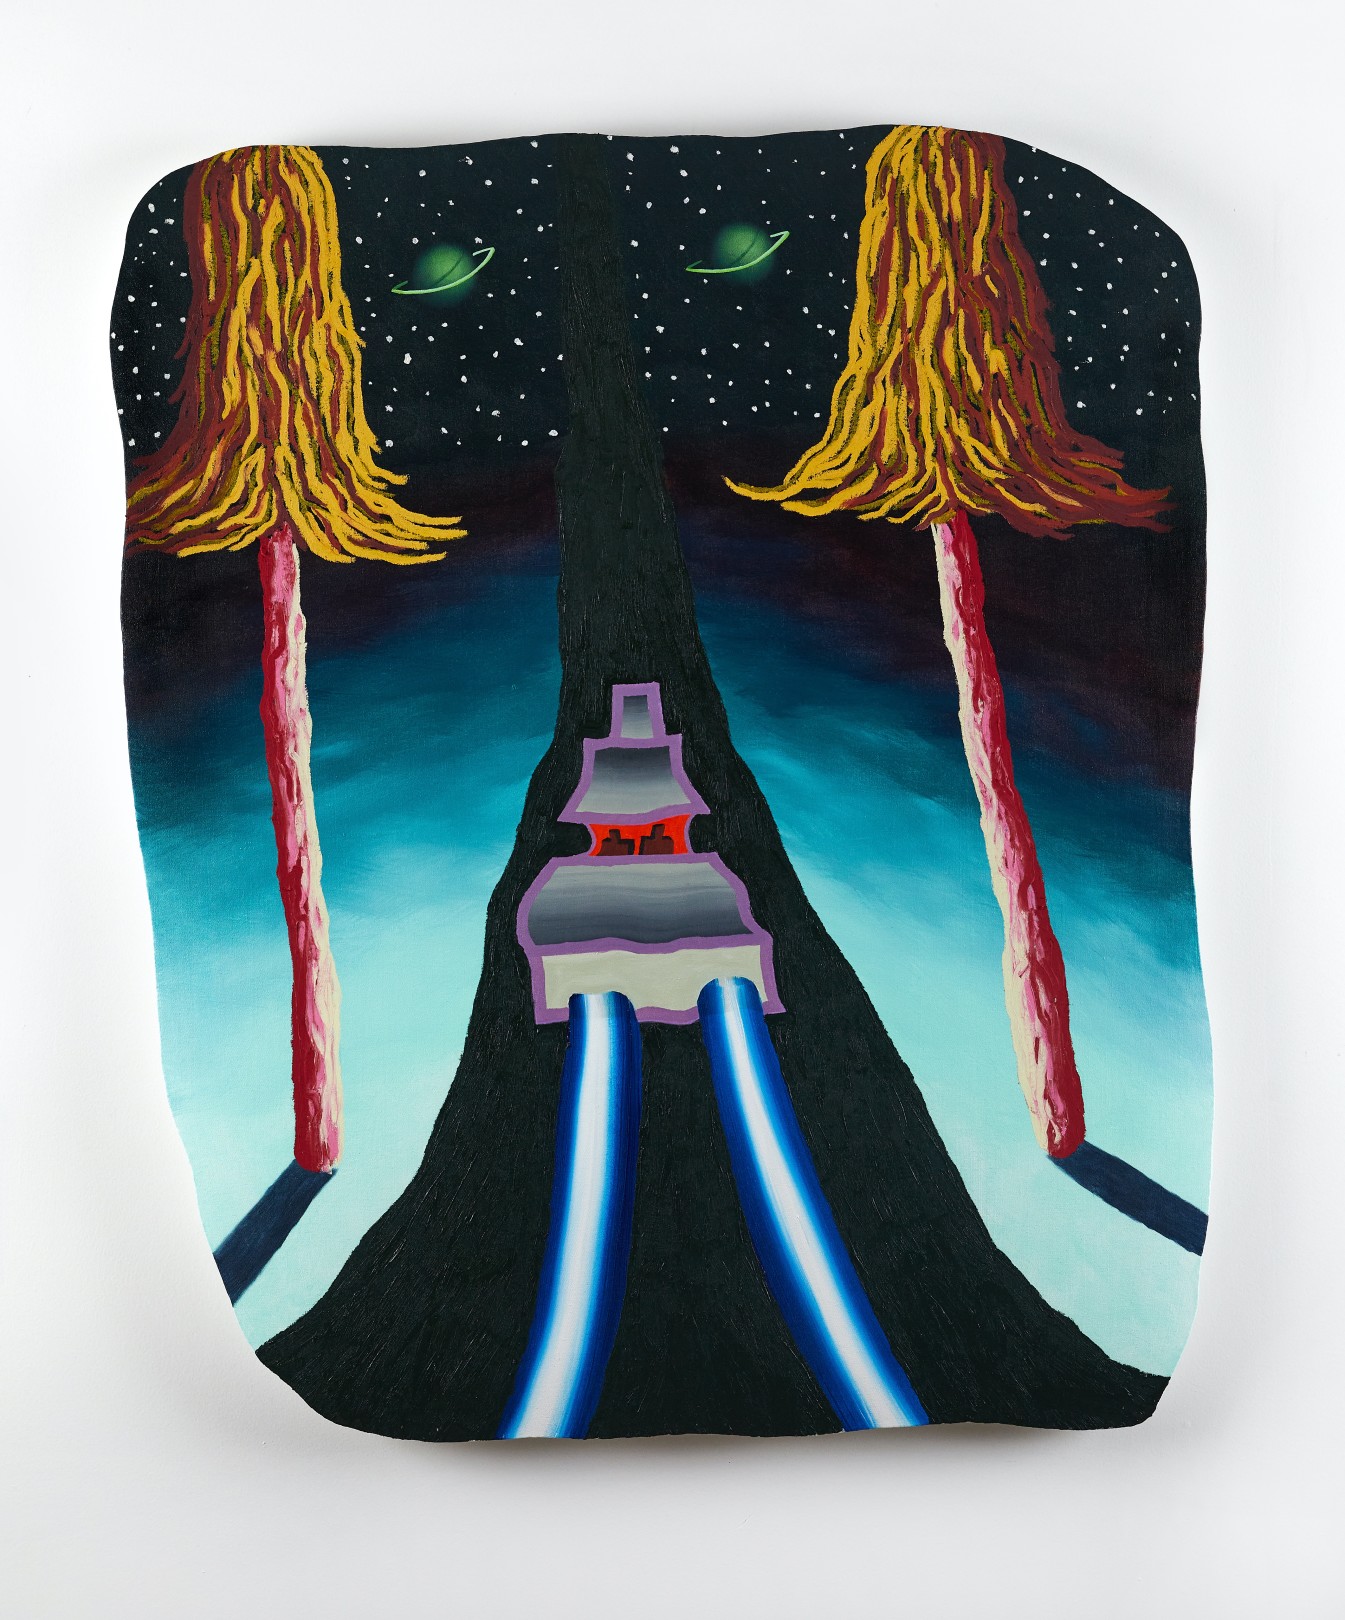 Night Car (Vague Distinction 6), 2021 Oil stick and acrylic on canvas approx. 122 x 101.5 x 5 cm. / 48 x 40 x 2 in.